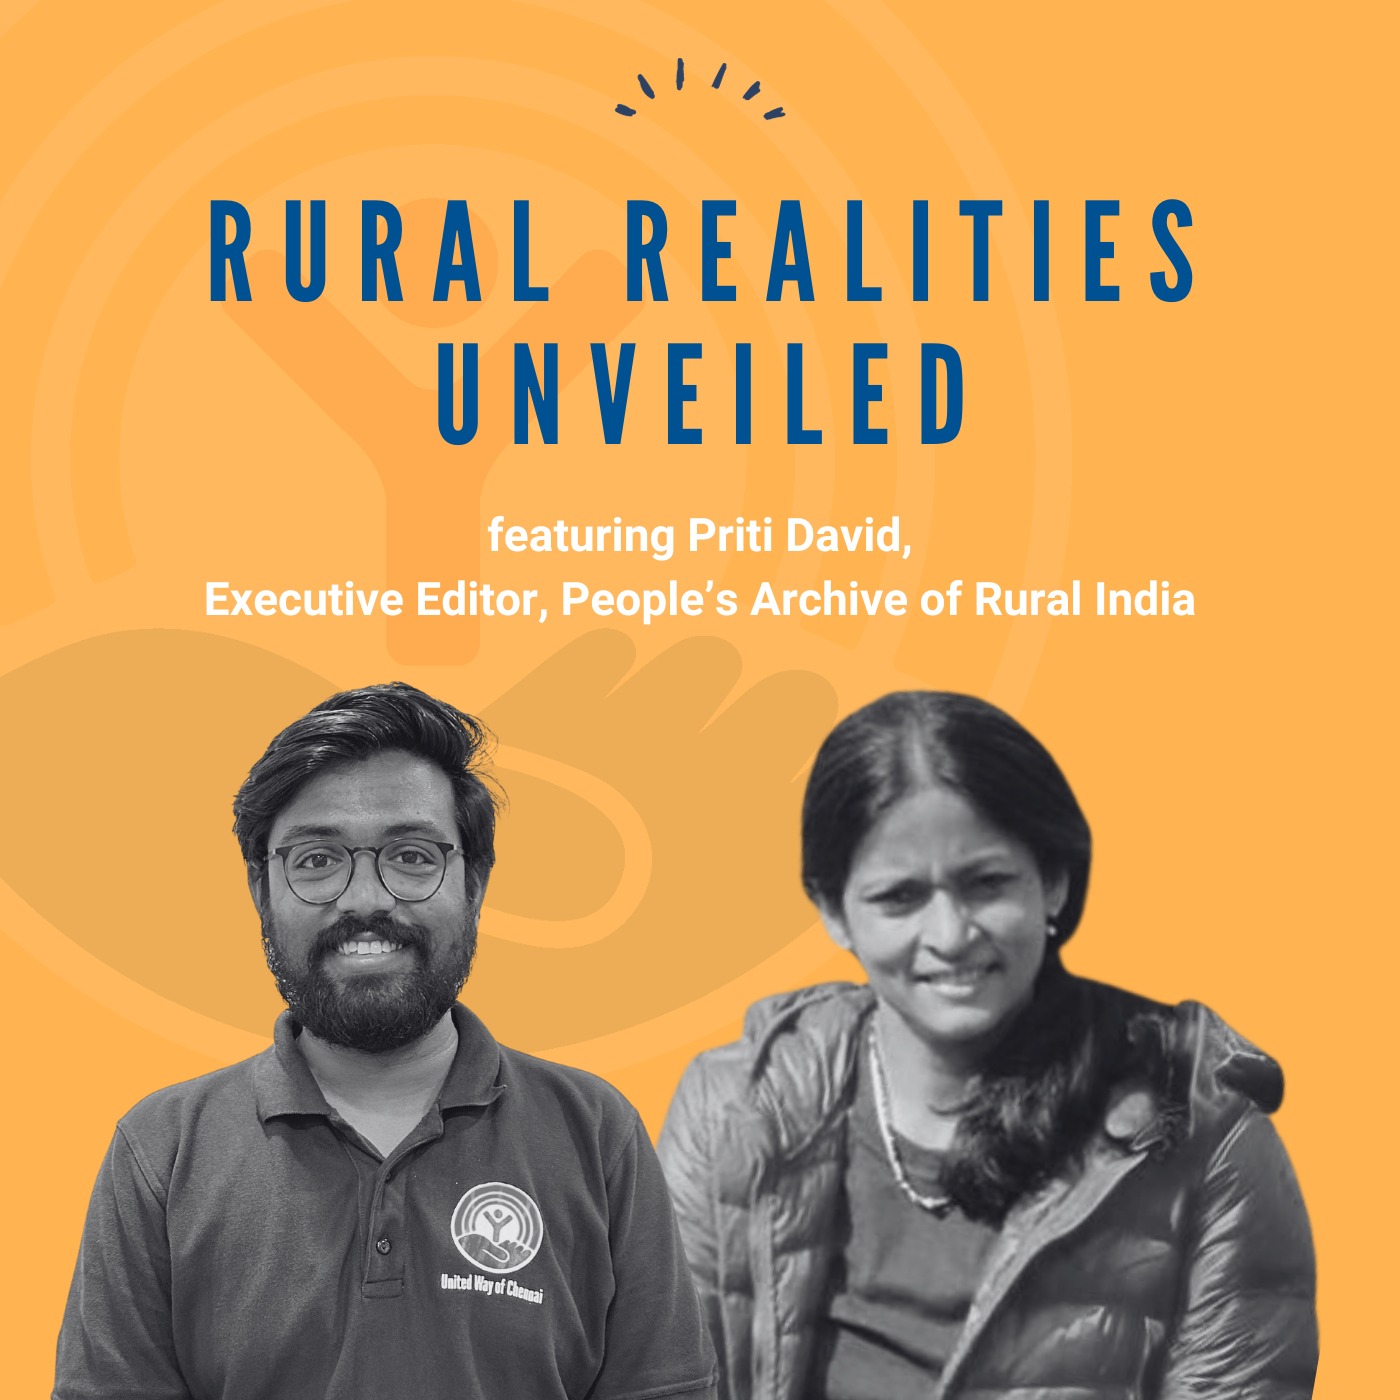 Rural Realities Unveiled: A Conversation with Priti David from PARI